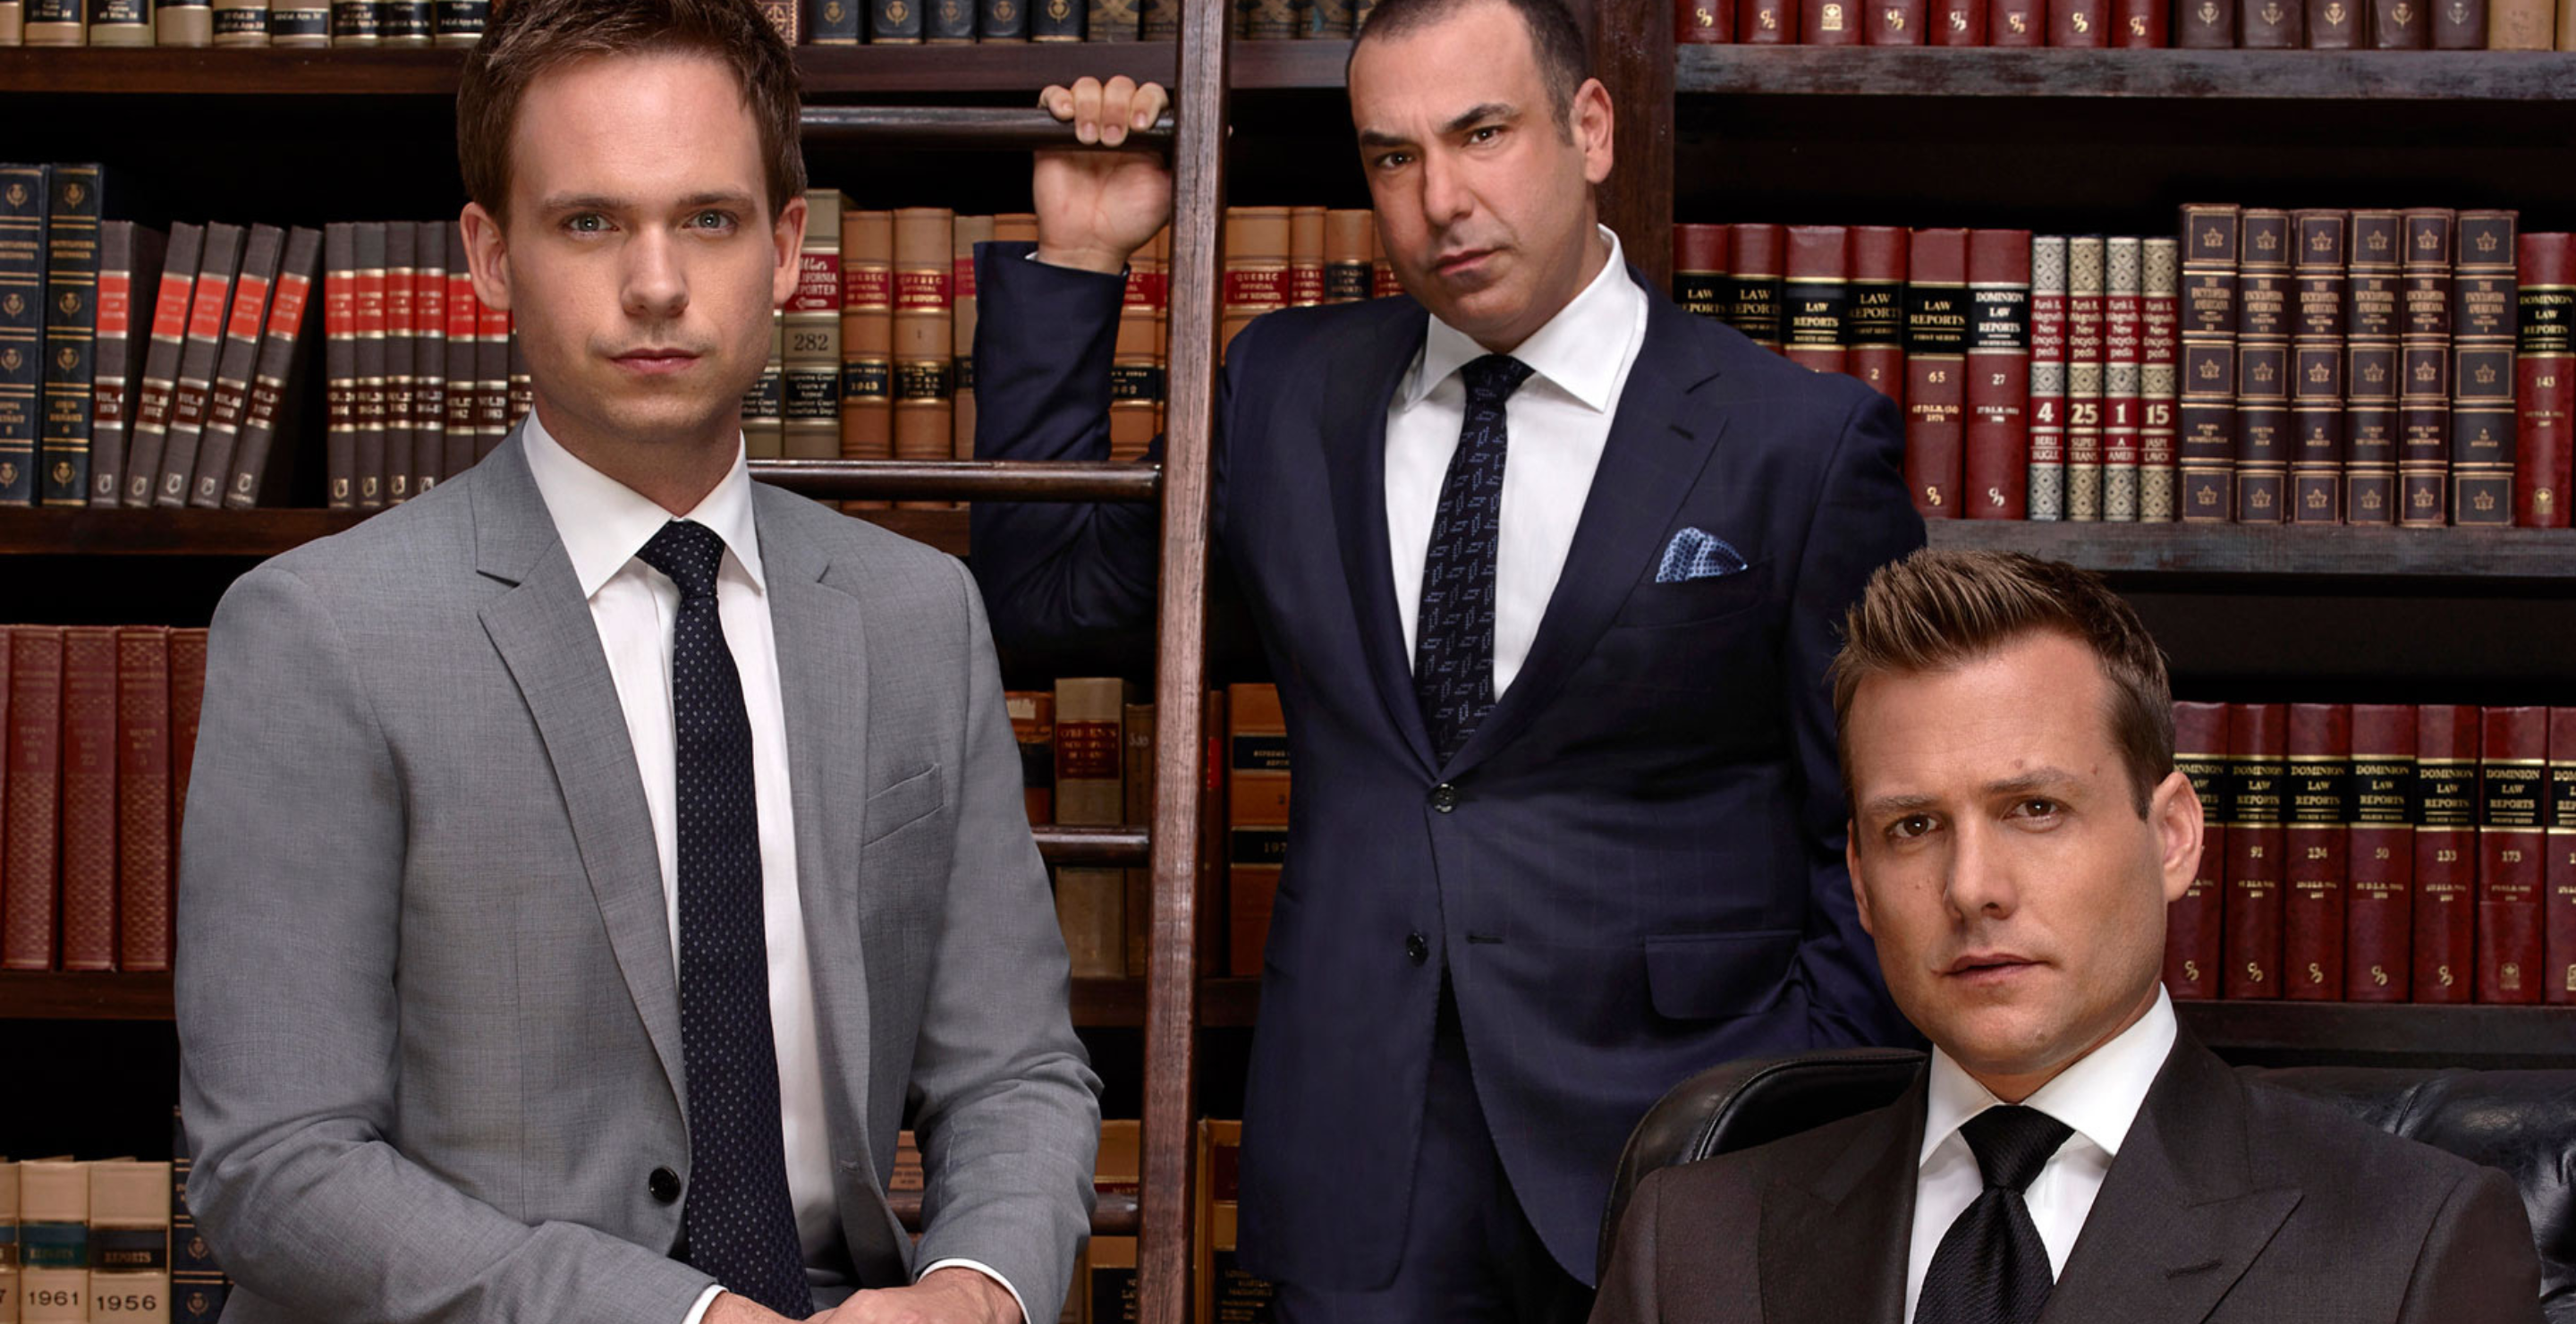 I've never seen a more offensive modern day TV show than Suits. The scenes  with women consist of: 1) sexy walking 2) teasing or flirting with the men  of the show 3)